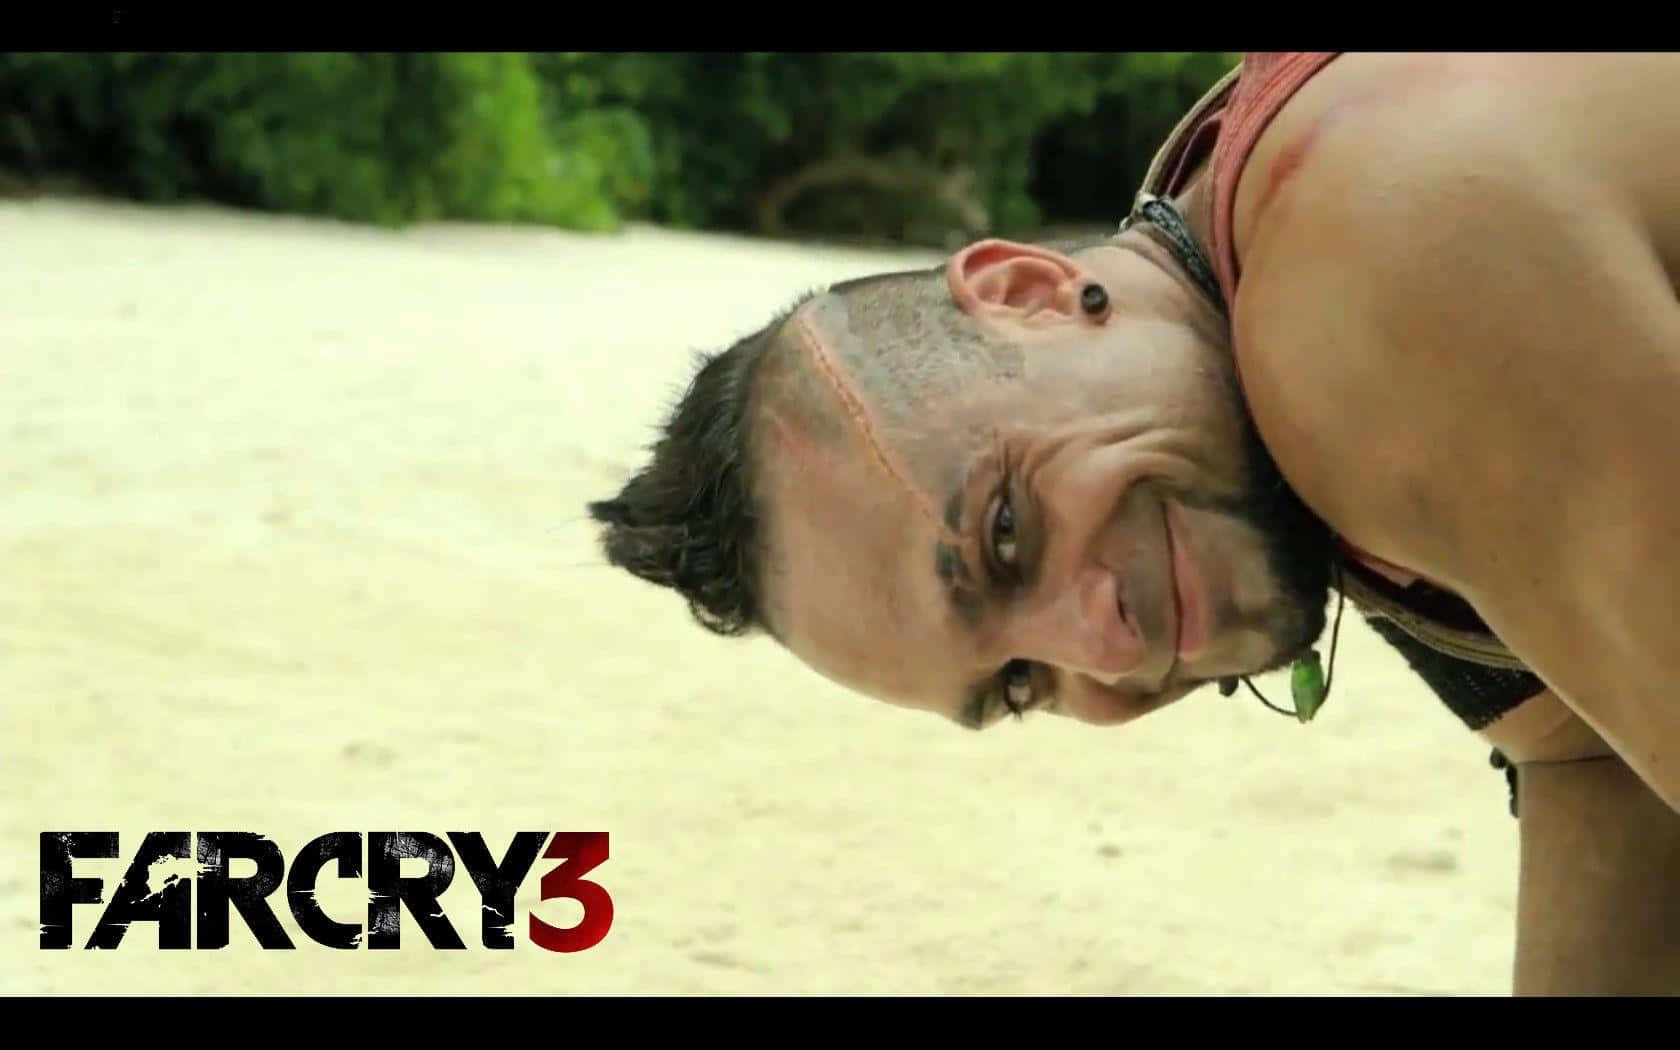 "Be the one who knows fear and respect the boundaries" - Vaas, Far Cry 3 Wallpaper